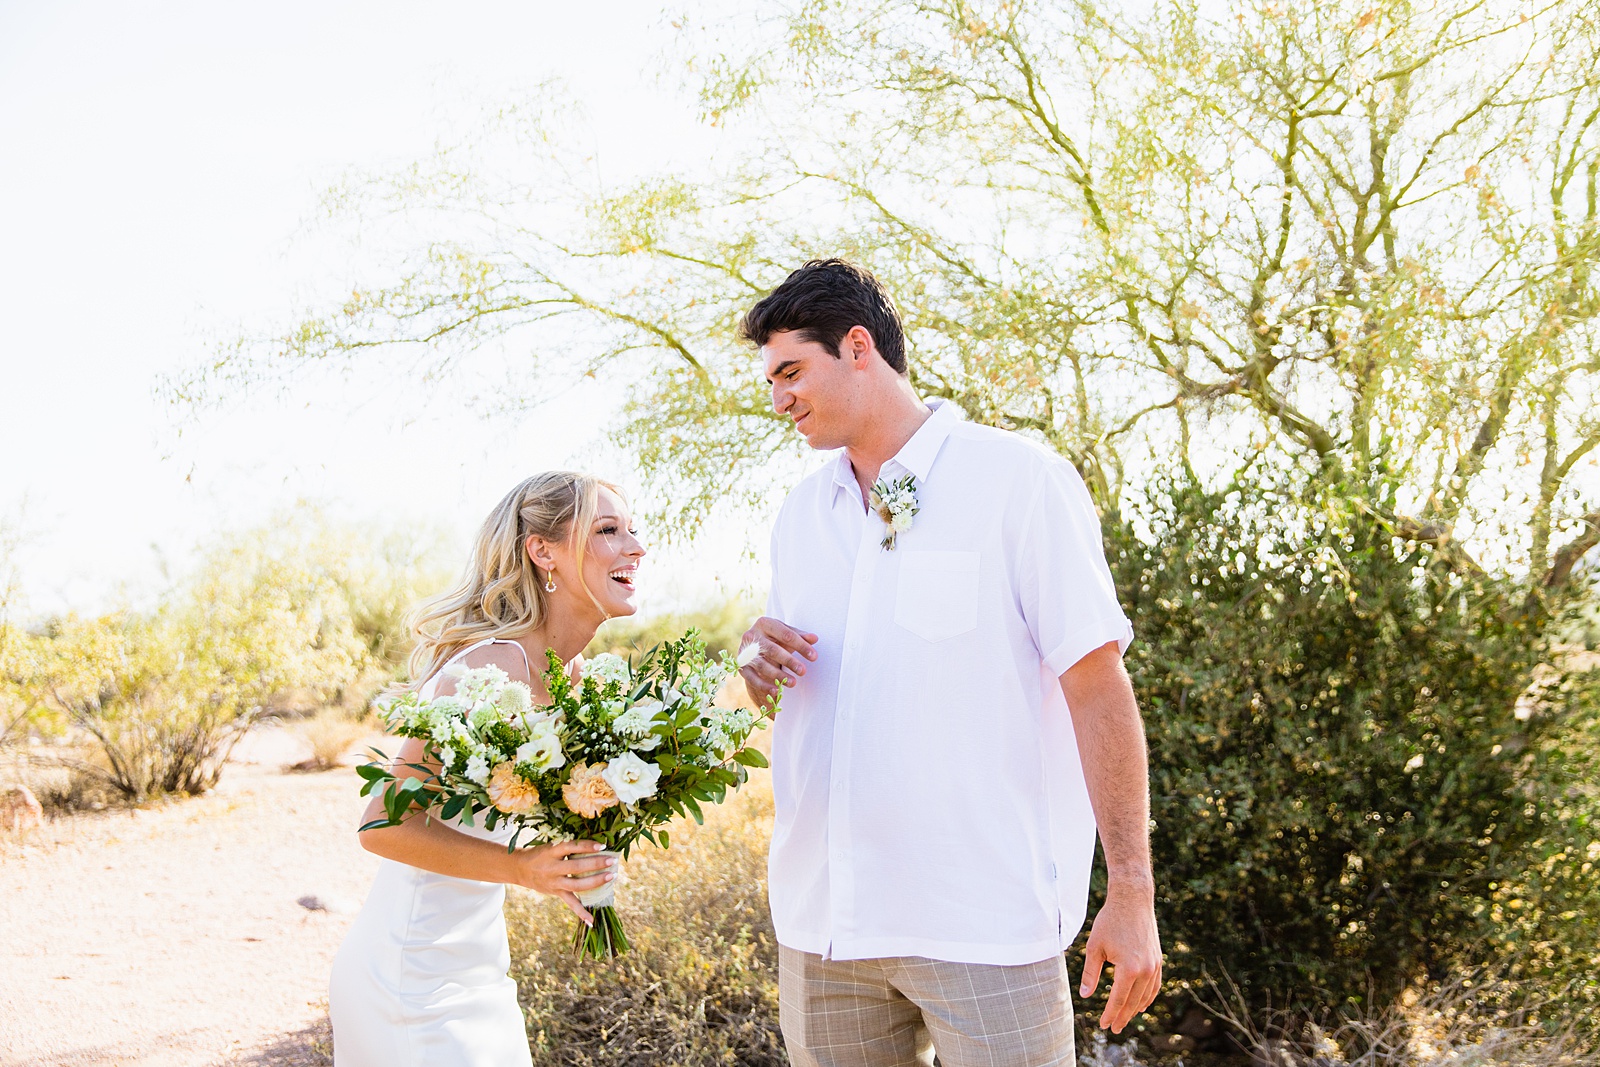 Bride and Groom's first look at Superstition Mountain Micro by Phoenix wedding photographer PMA Photography.